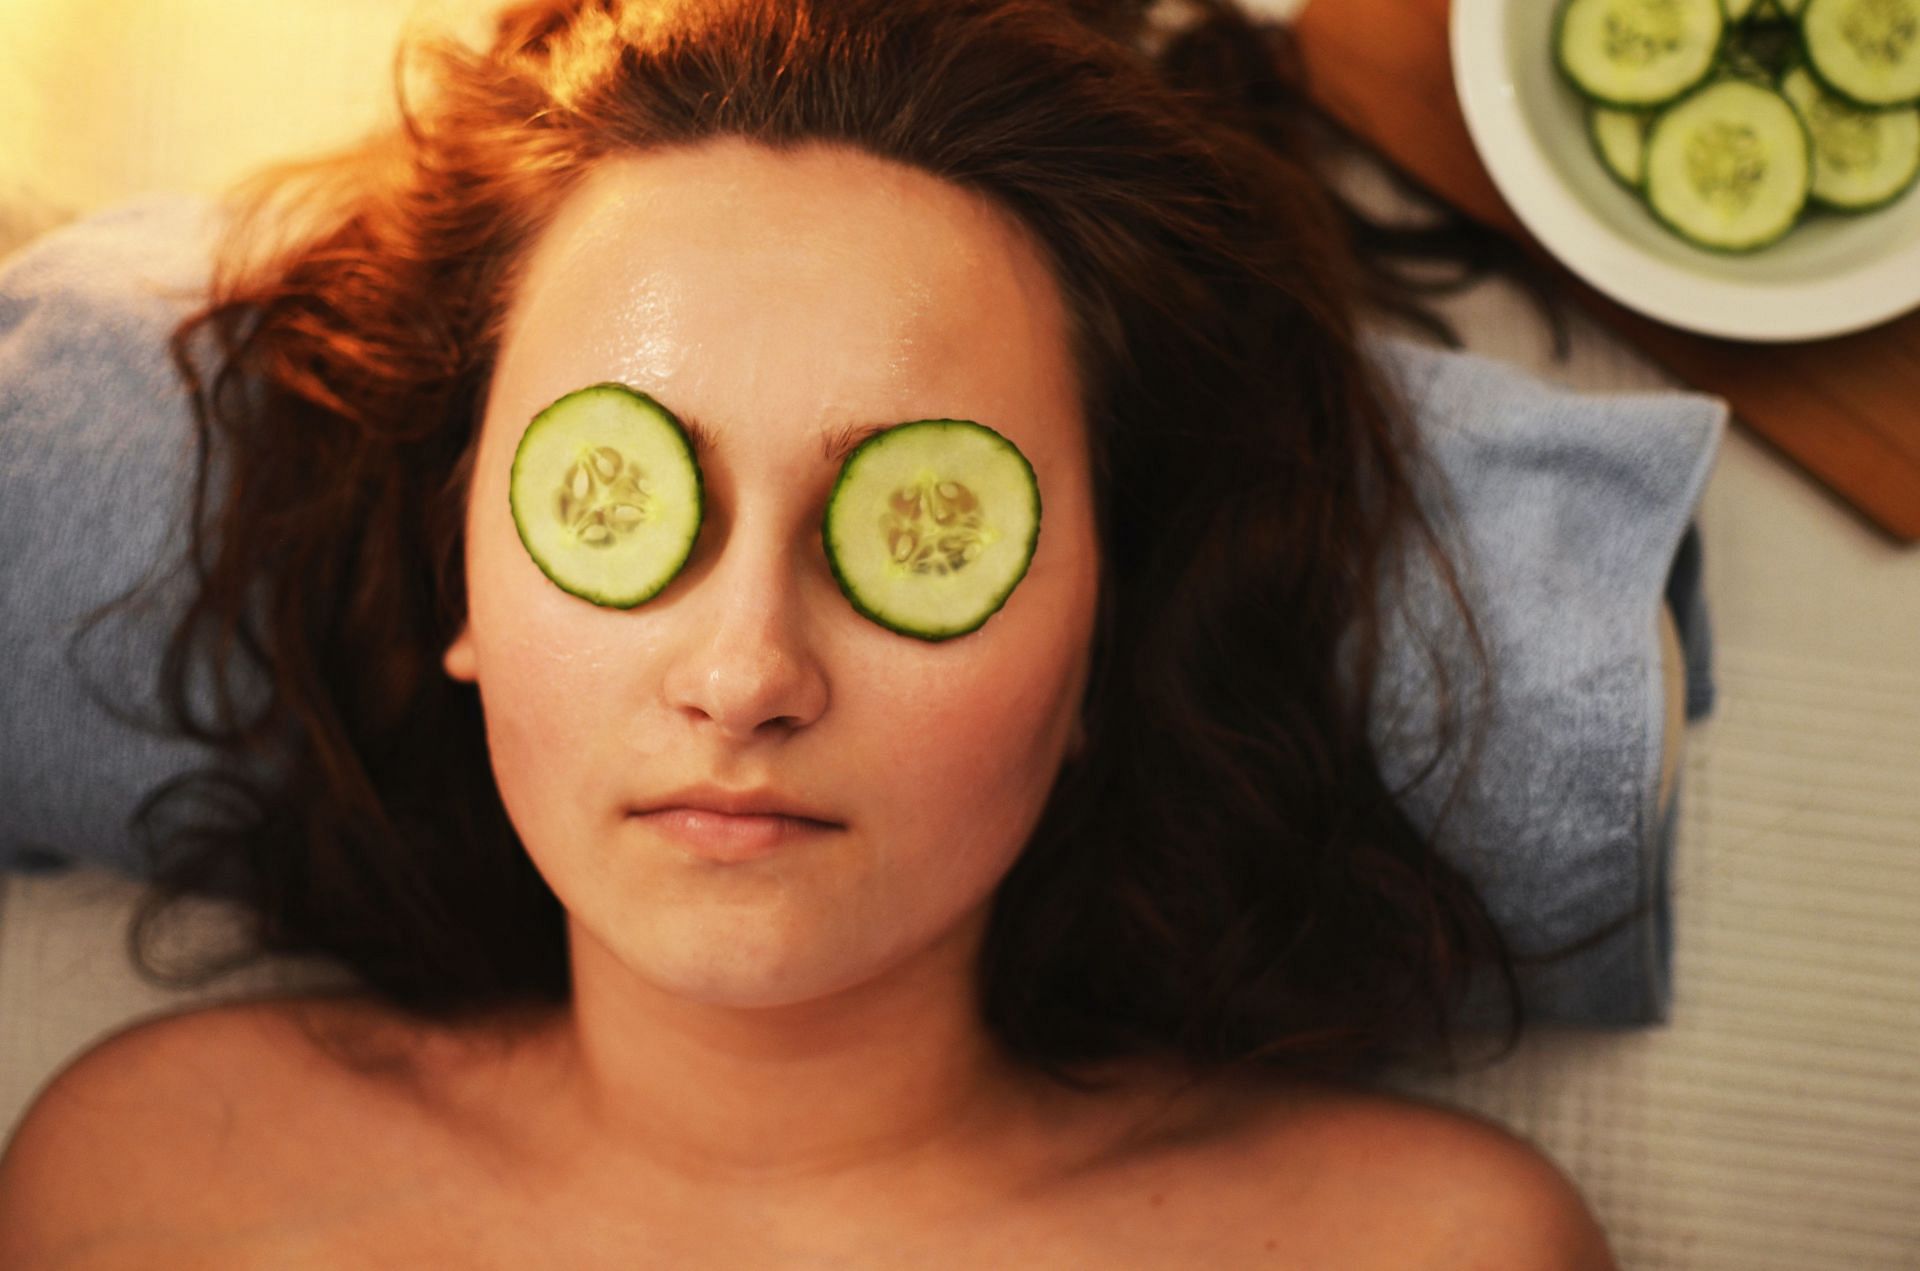 Cucumber reduces puffiness from eyes (Image via Pexels/ Breakingpic)